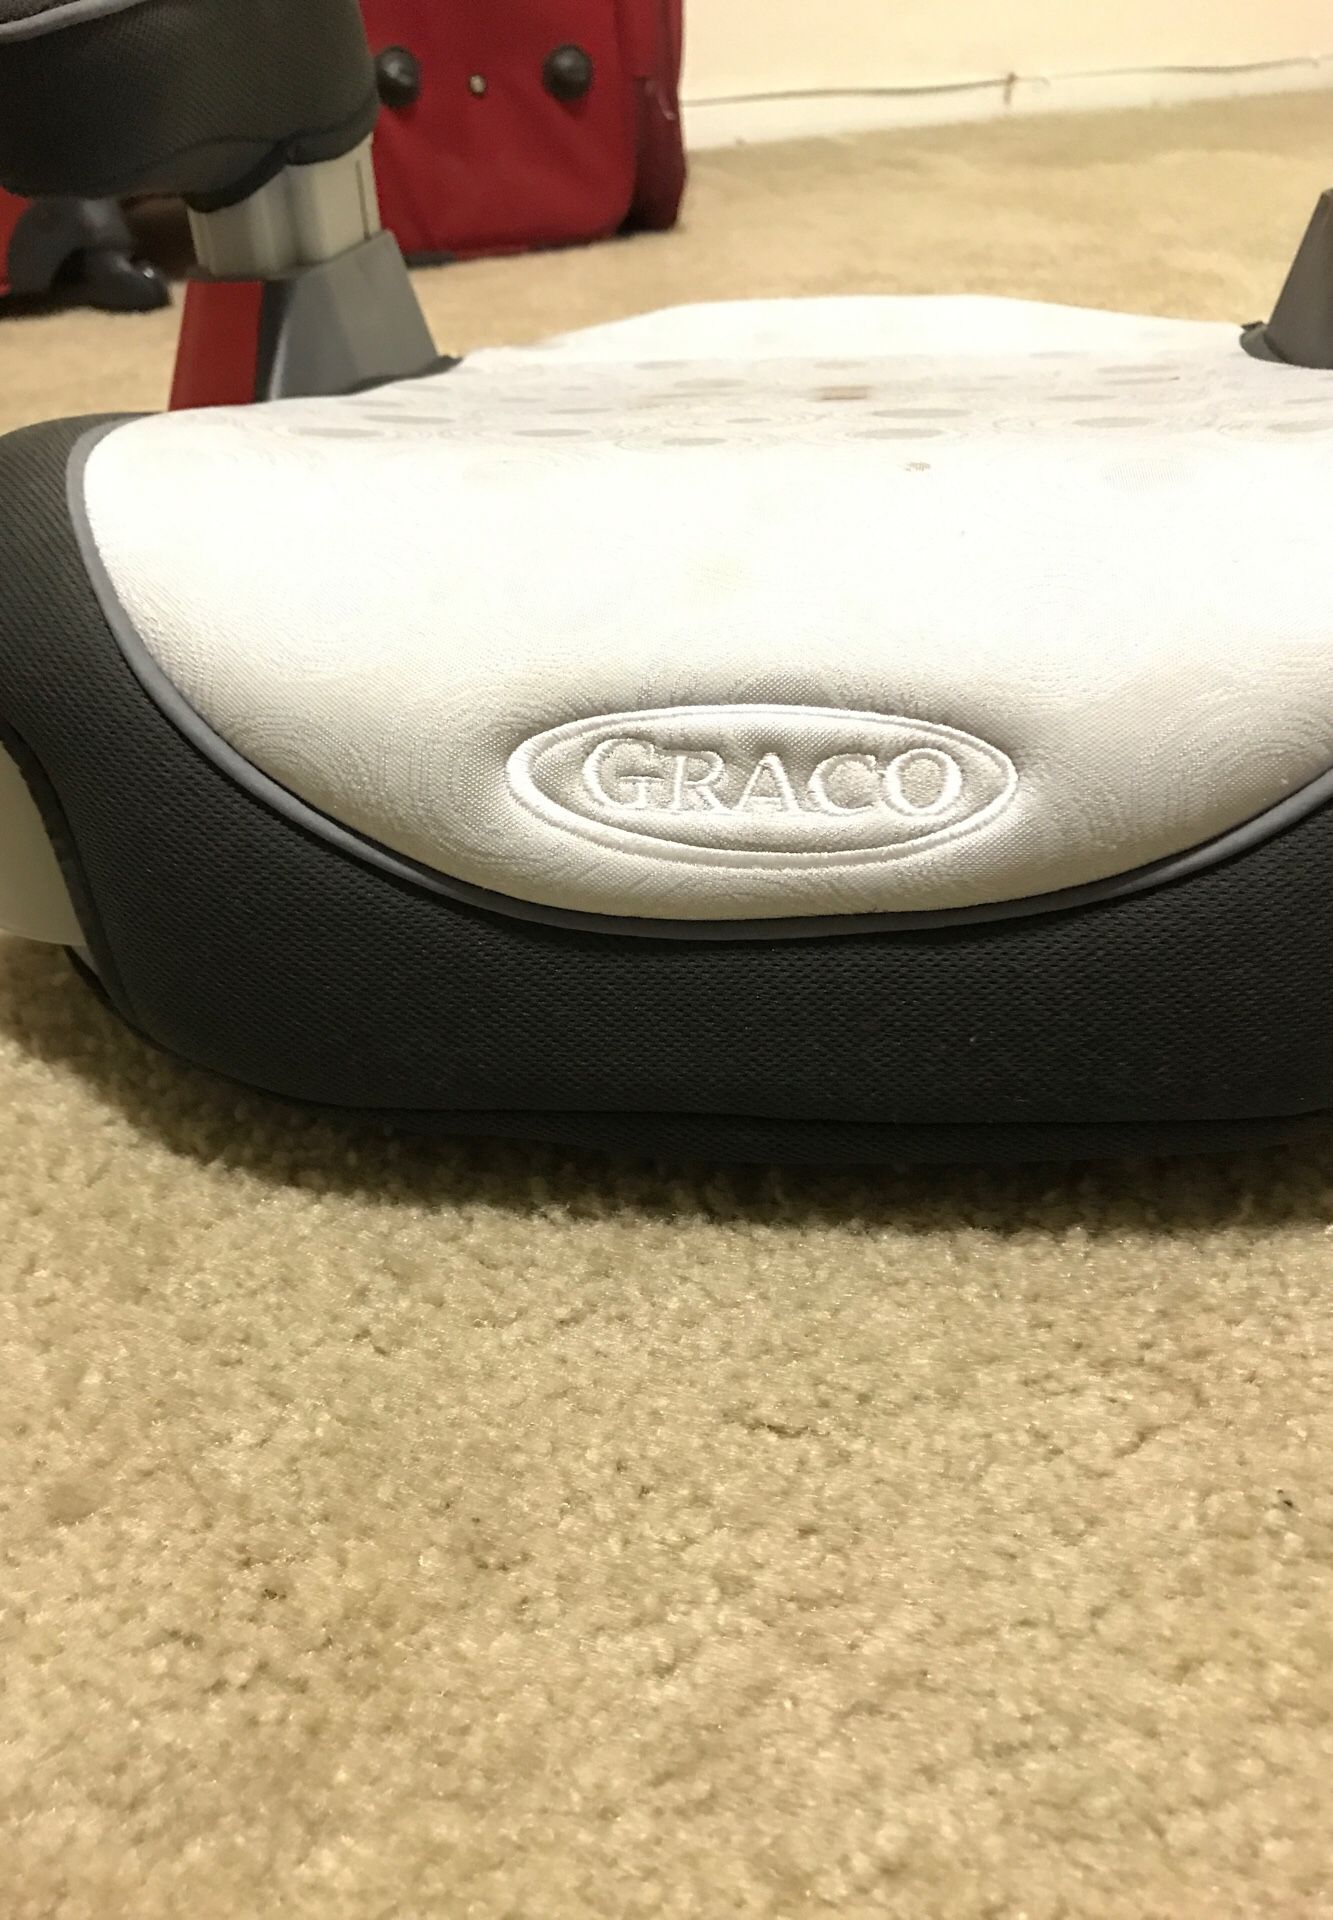 Graco backless turbo booster car seat